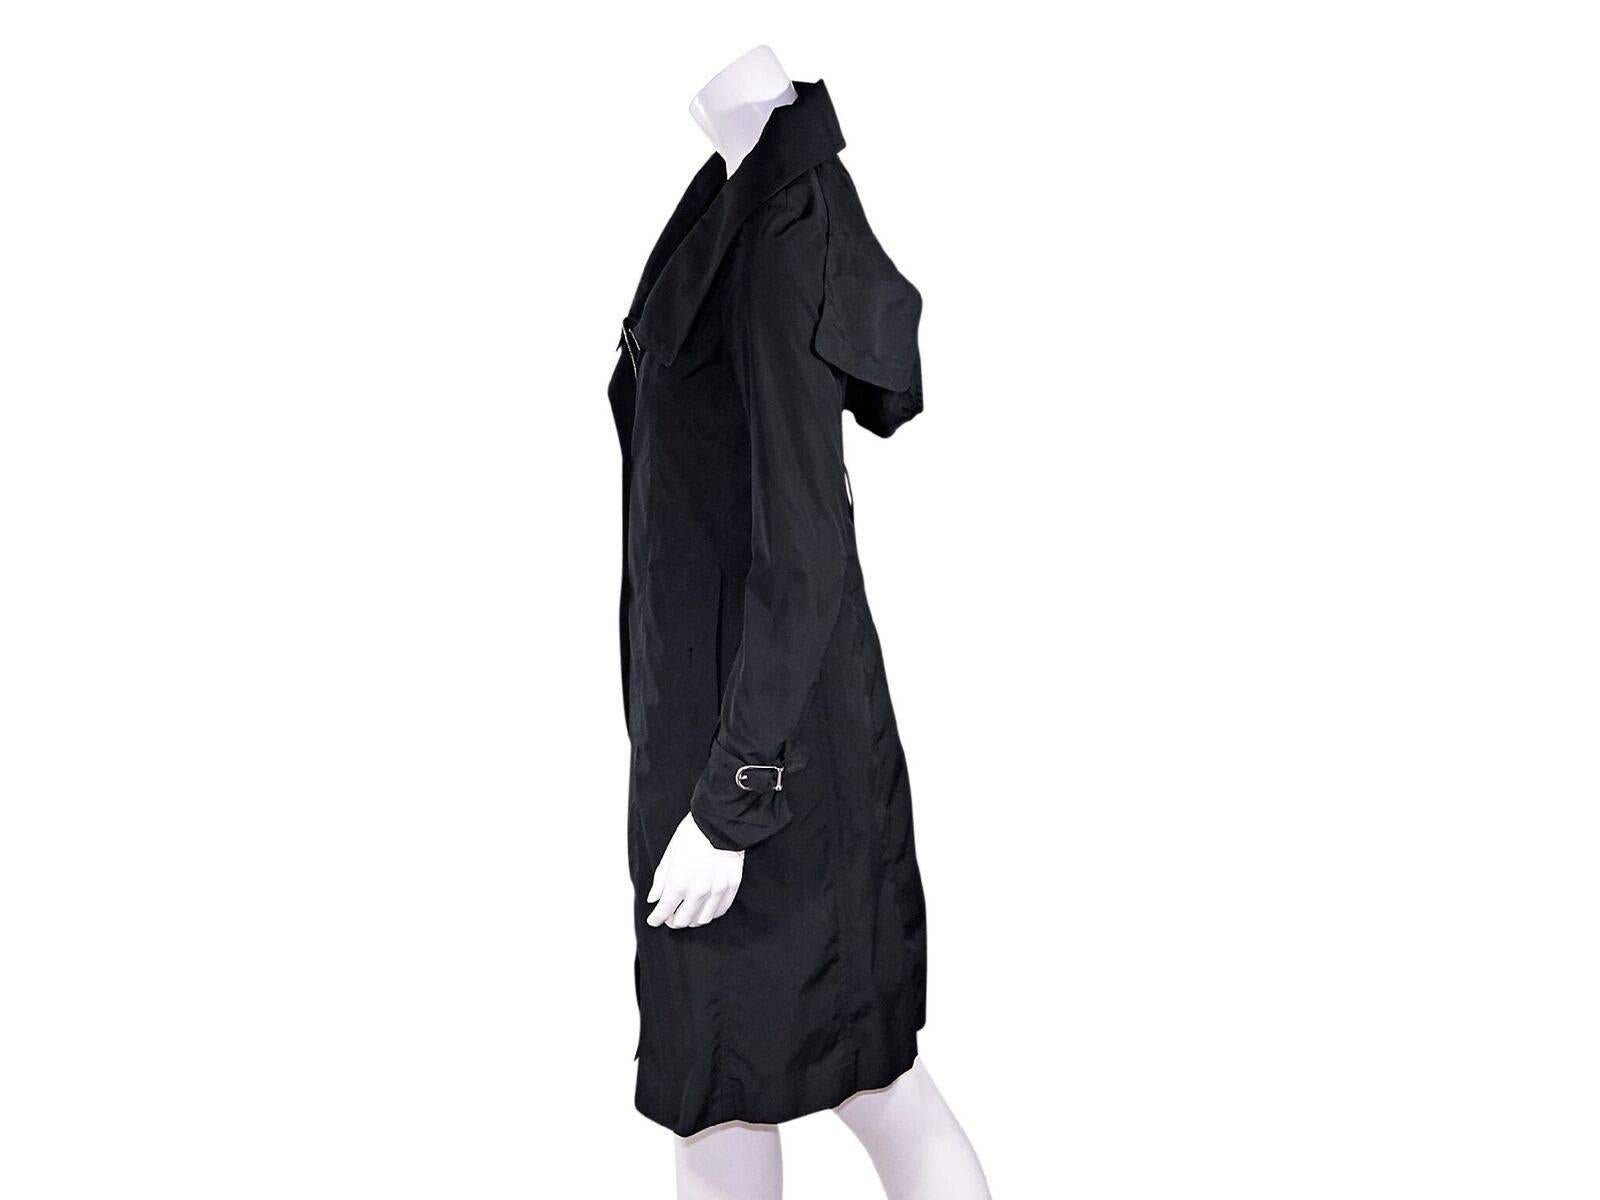 Product details:  Black hooded trench coat by Burberry London.  Spread collar.  Long sleeves.  Adjustable buckle cuff strap.  Concealed snap placket over zip-front closure.  Waist slide pockets.  Back center hem vent.  Label size UK 6.  32